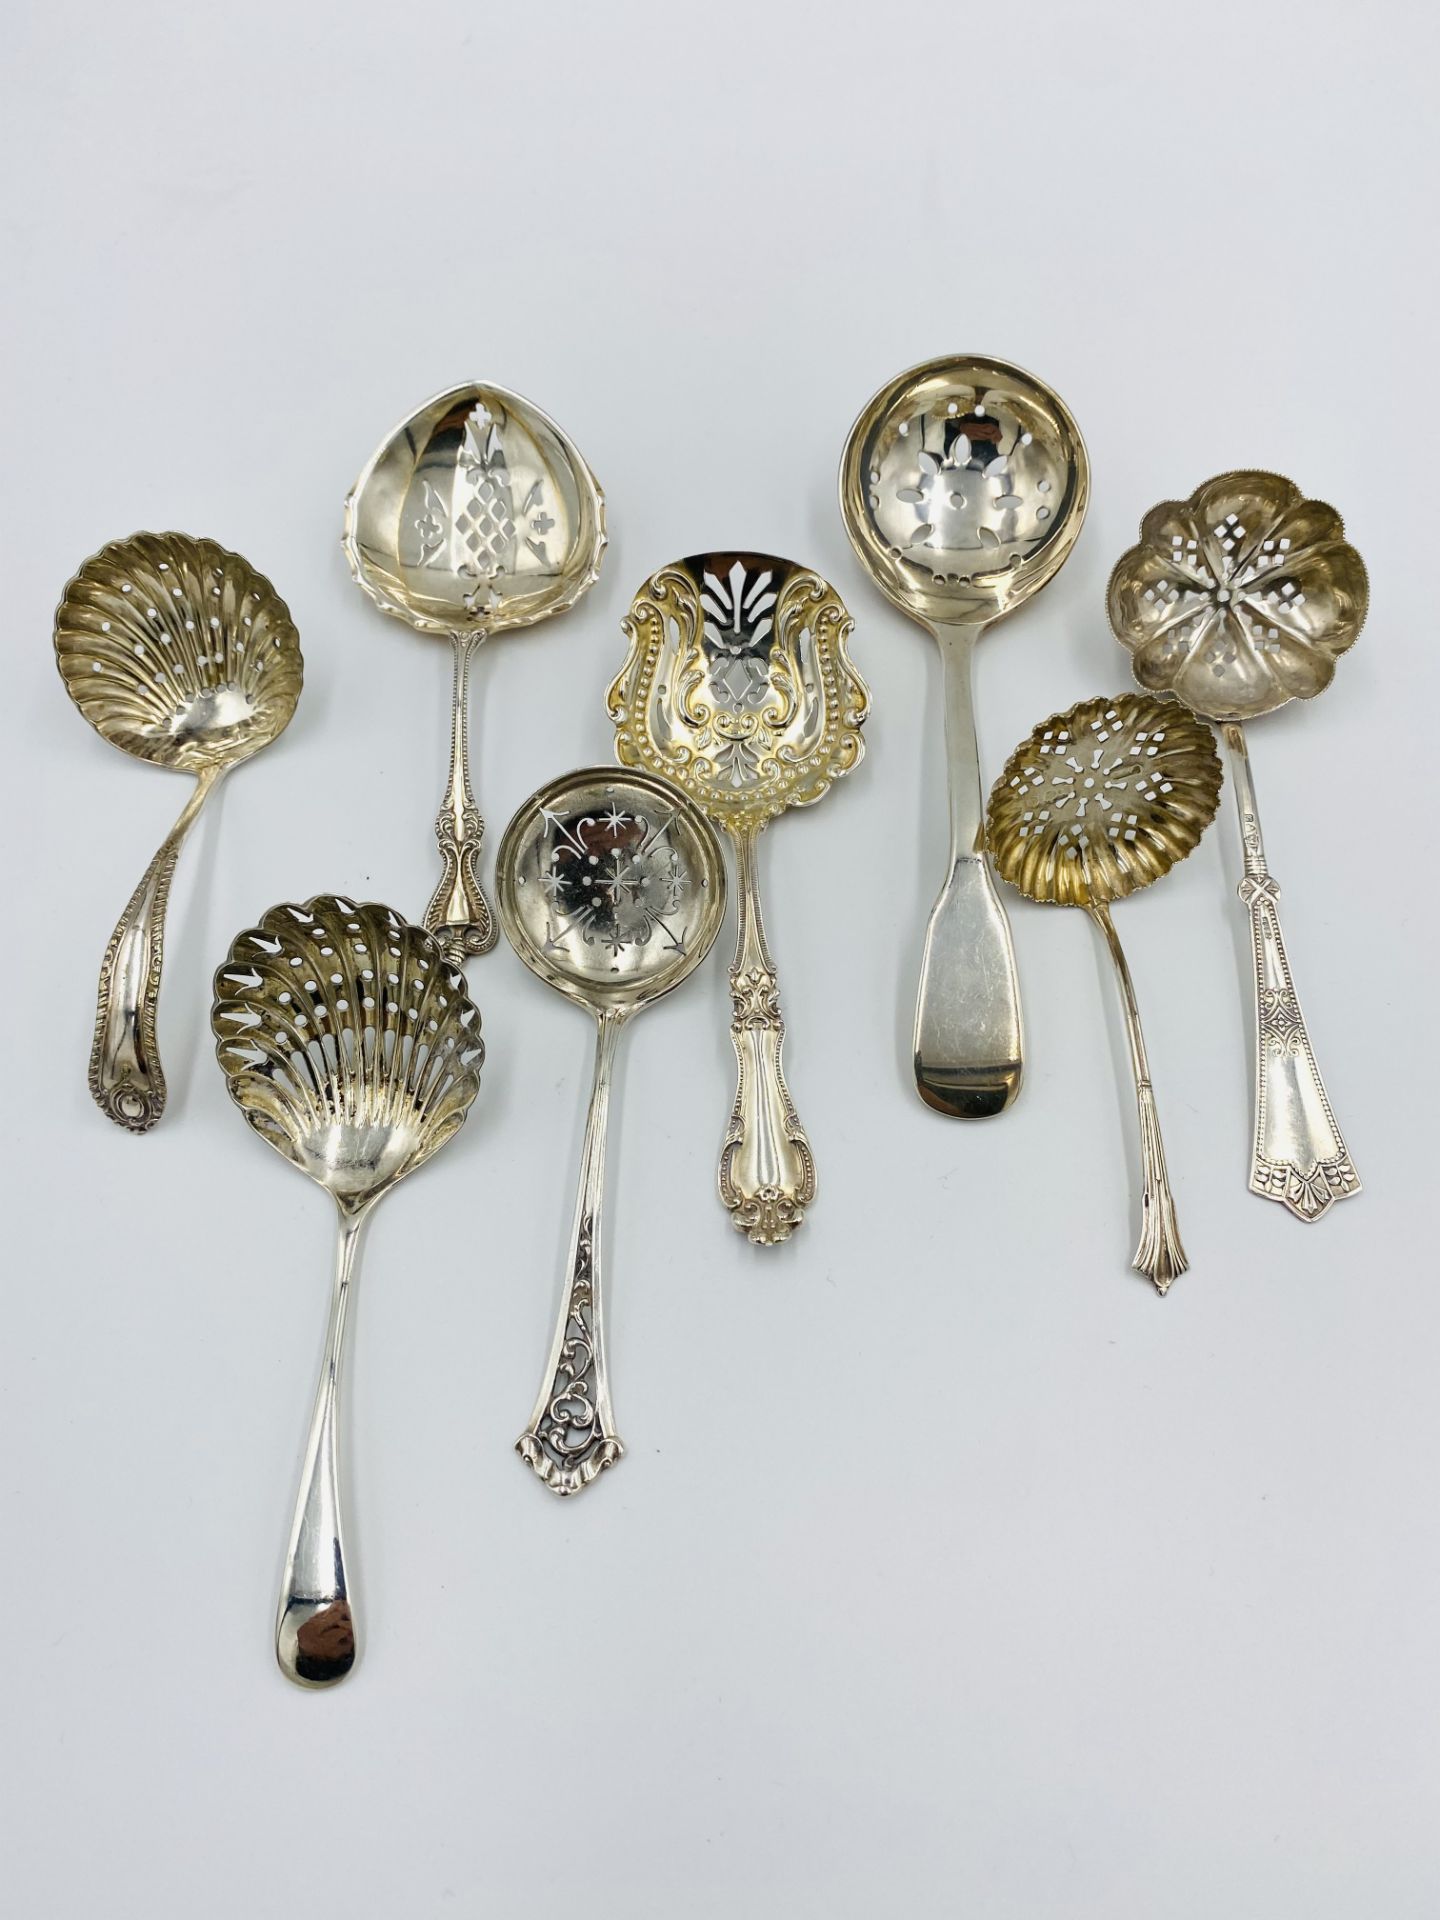 A collection of silver sugar sifters and a silver plated sugar sifter - Image 4 of 4